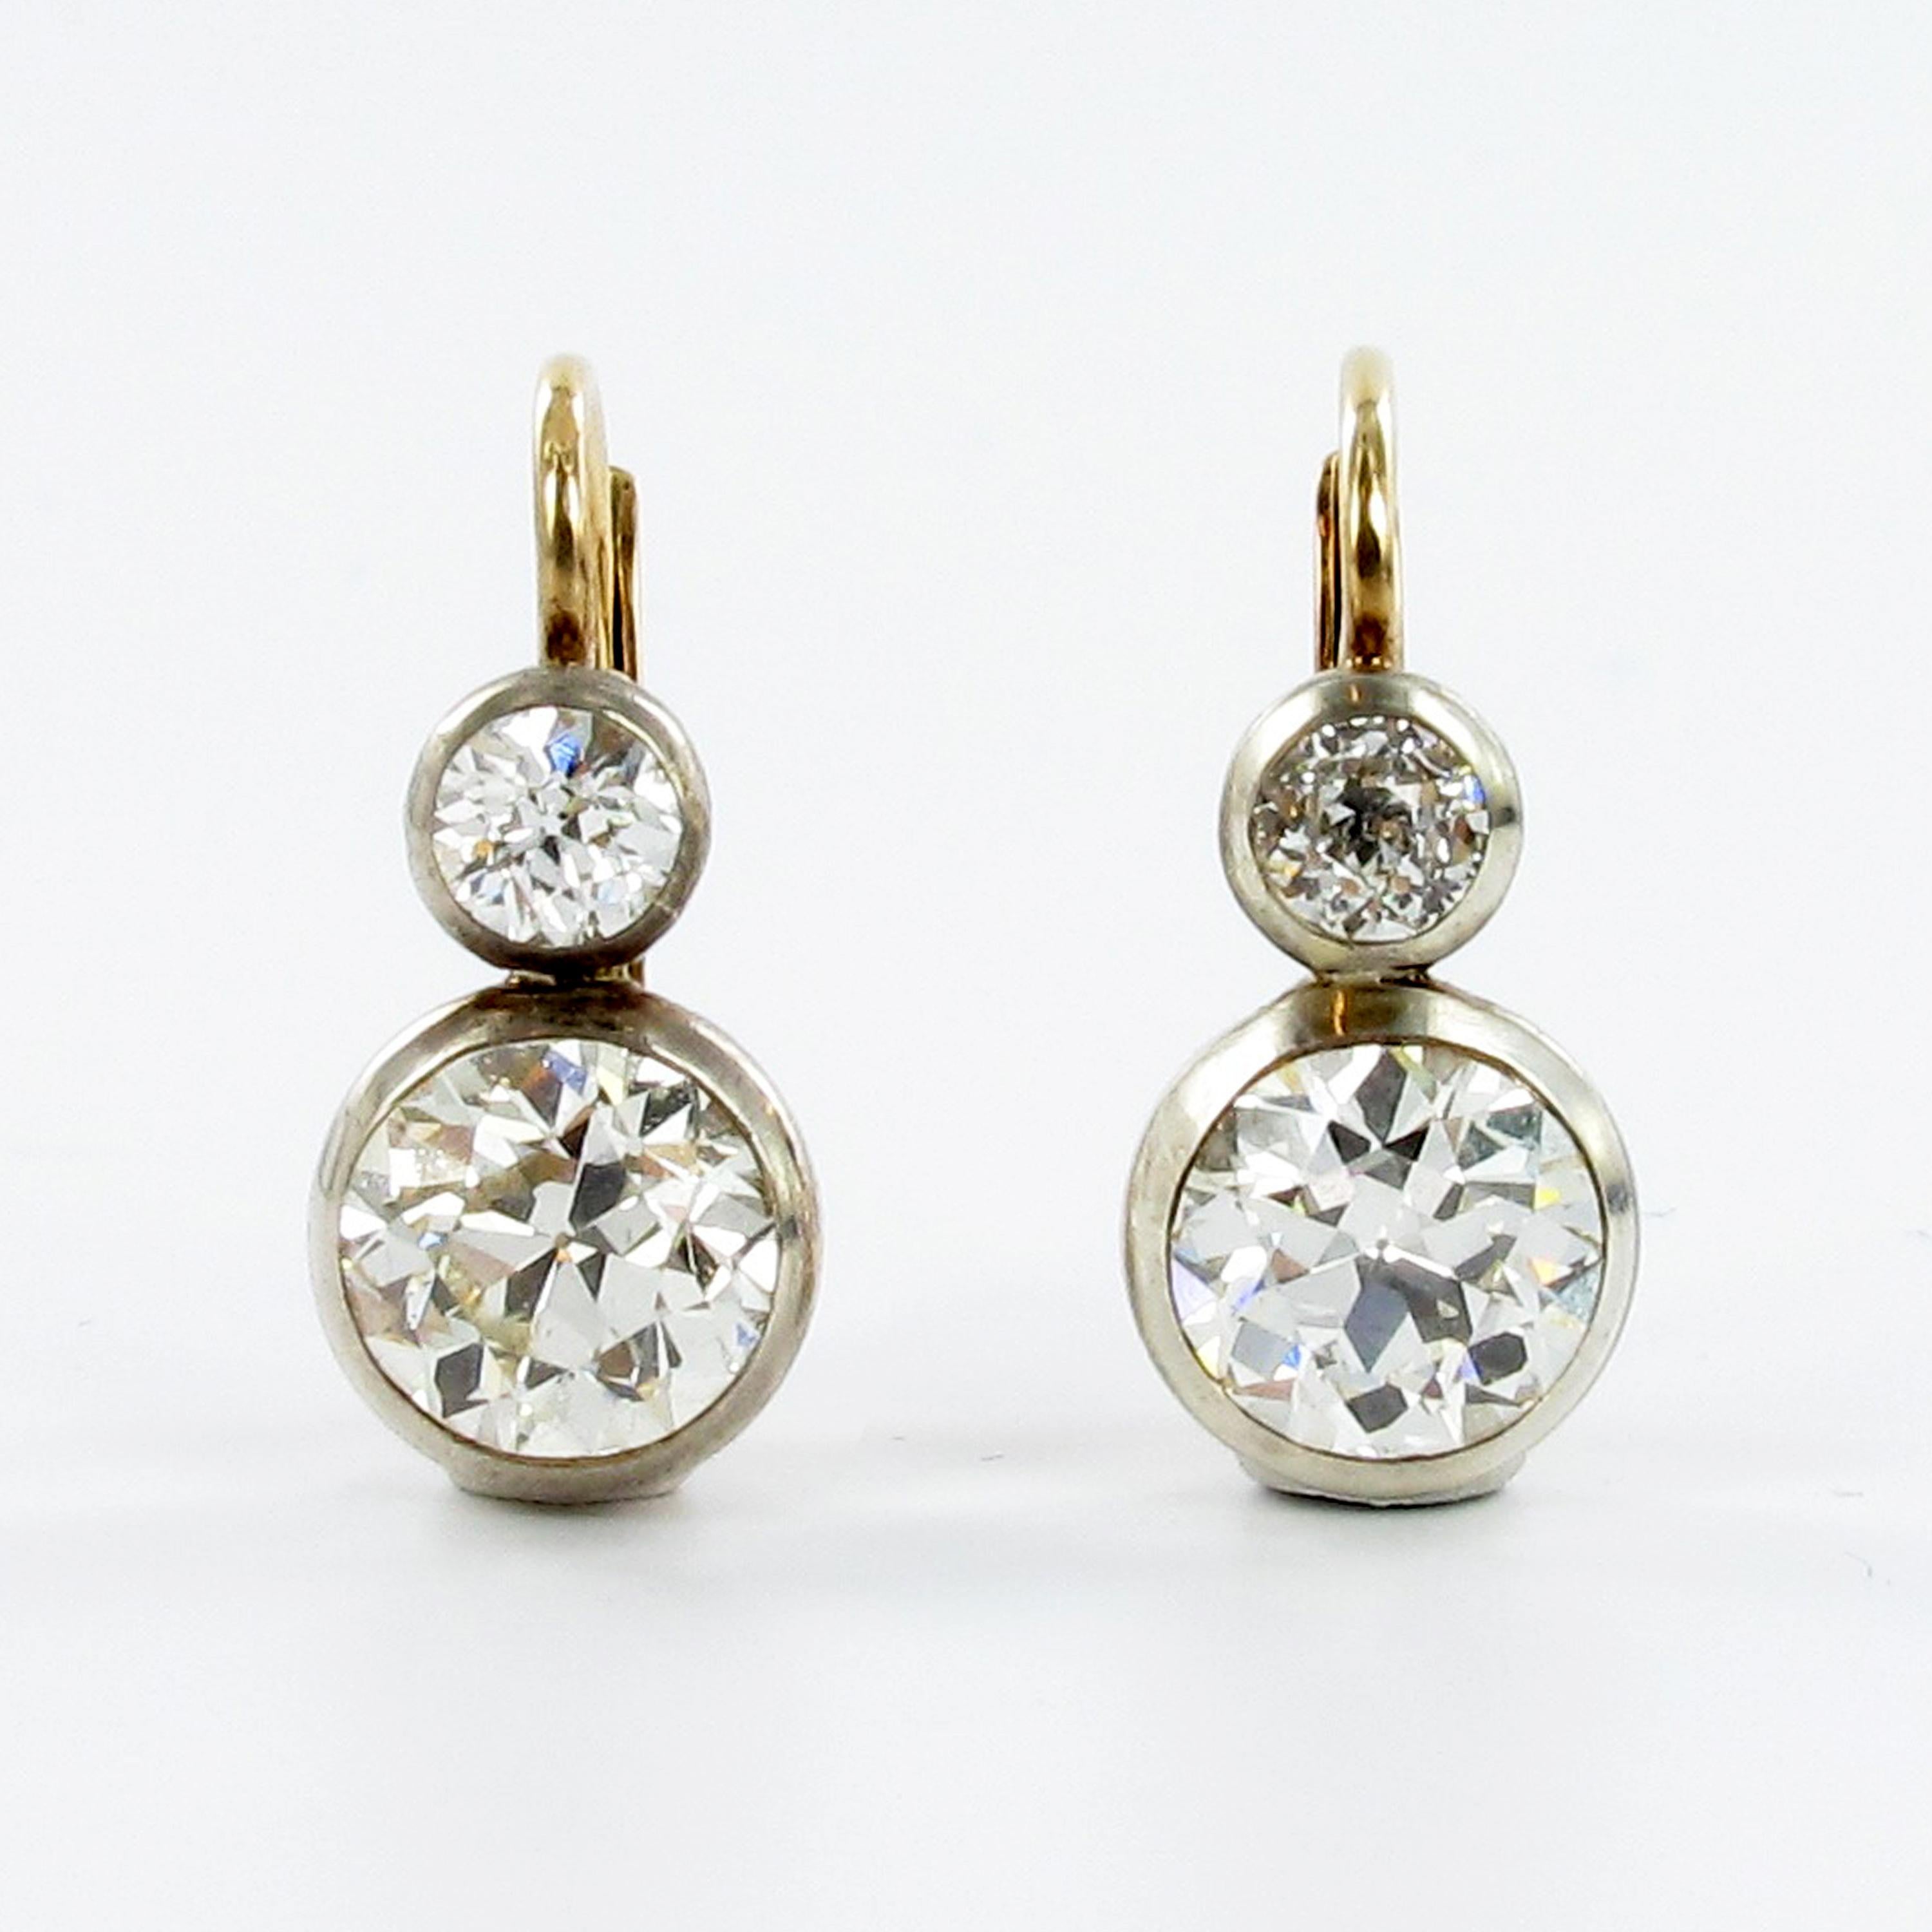 Pair of Victorian diamond earclips in silver on redgold 585. The clips a bezel-set with two old european cut diamonds weighing approximate 1.12 carats each with G/H-vs quality. The two old cut diamonds on top are totaling approximate 0.46